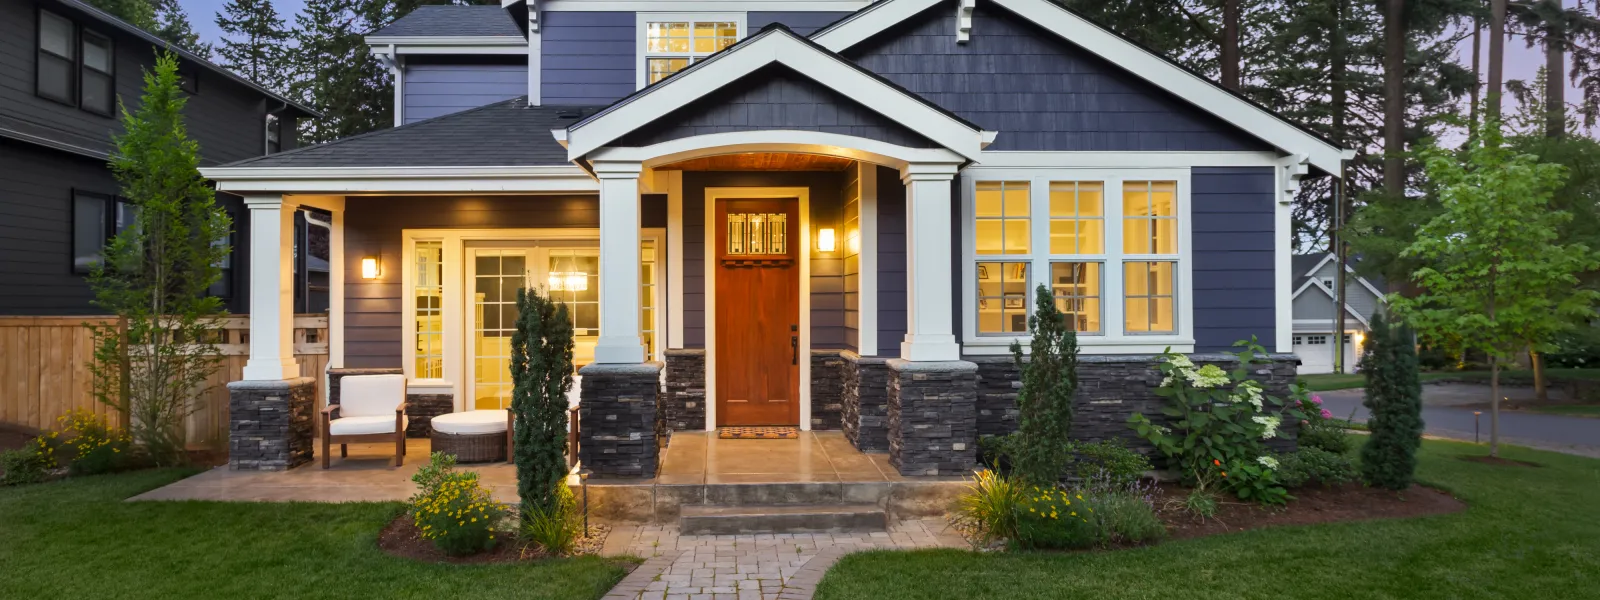 5 Tips to Winterize Your Home’s Doors